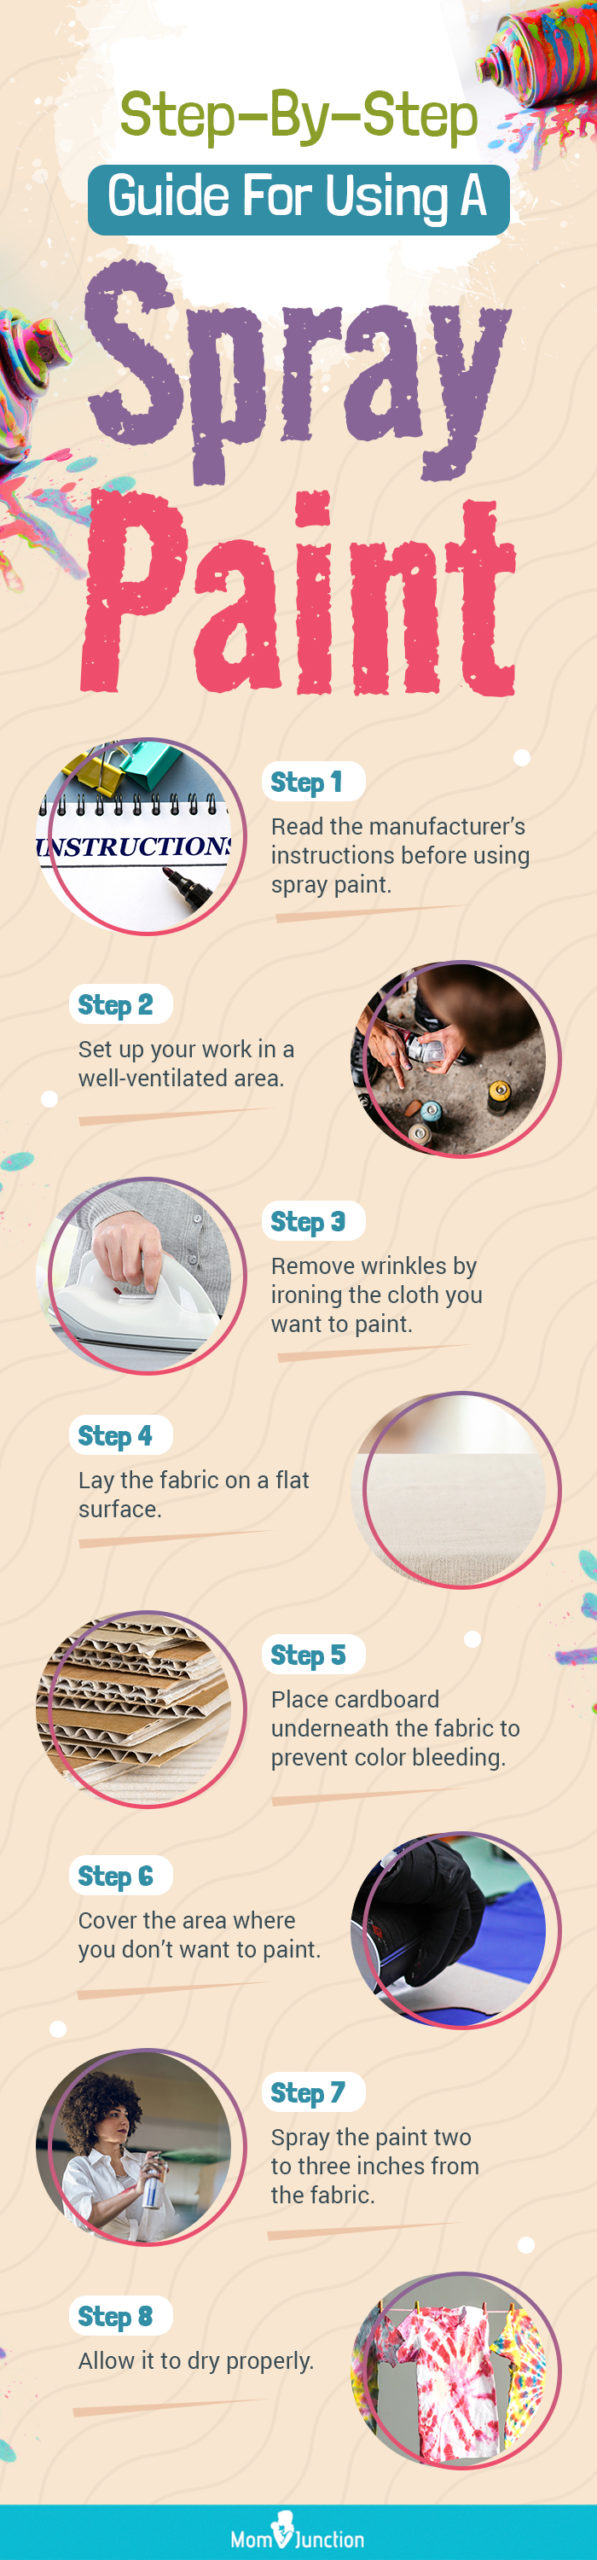 Step-By-Step-Guide-For-Using-A-Spray-Paint (infographic)